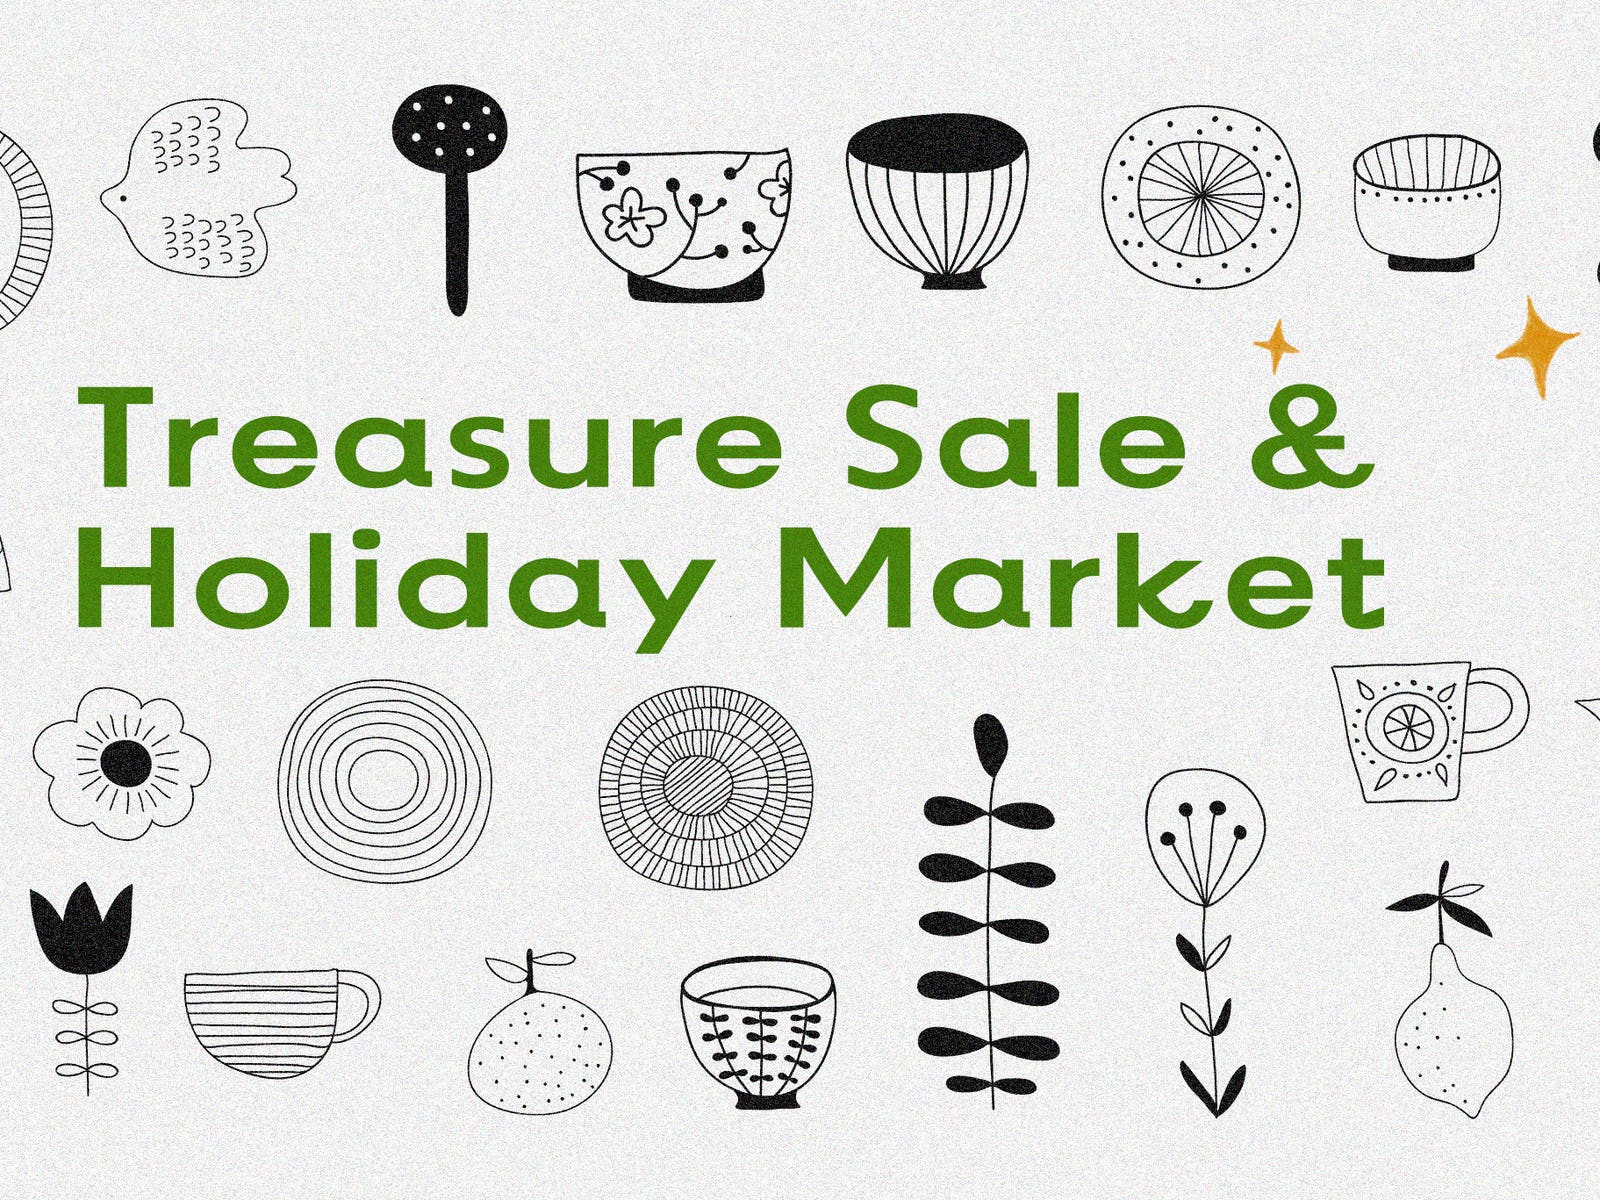 line drawings of bowls, teapots, and vases. Language reads: Treasure Sale & Holiday Market